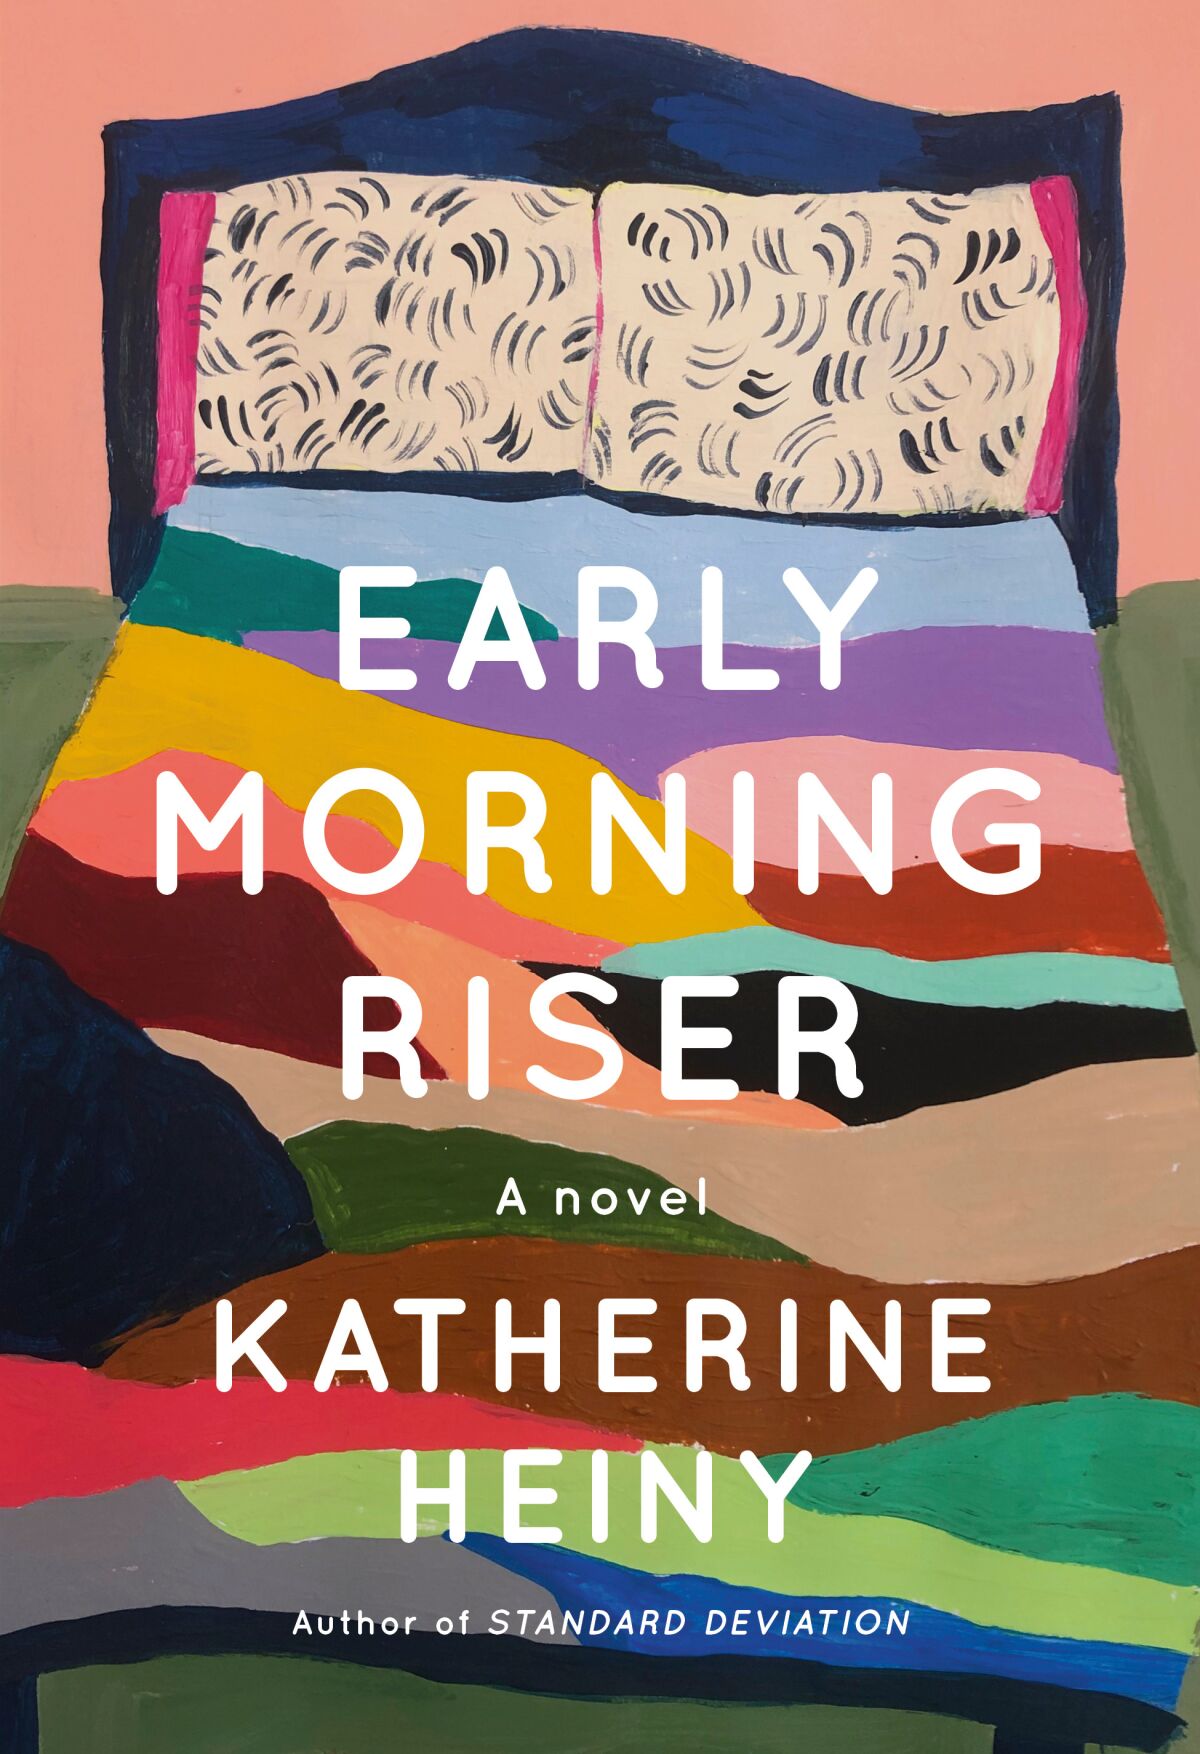 "Early Morning Riser" by Catherine Heiny.